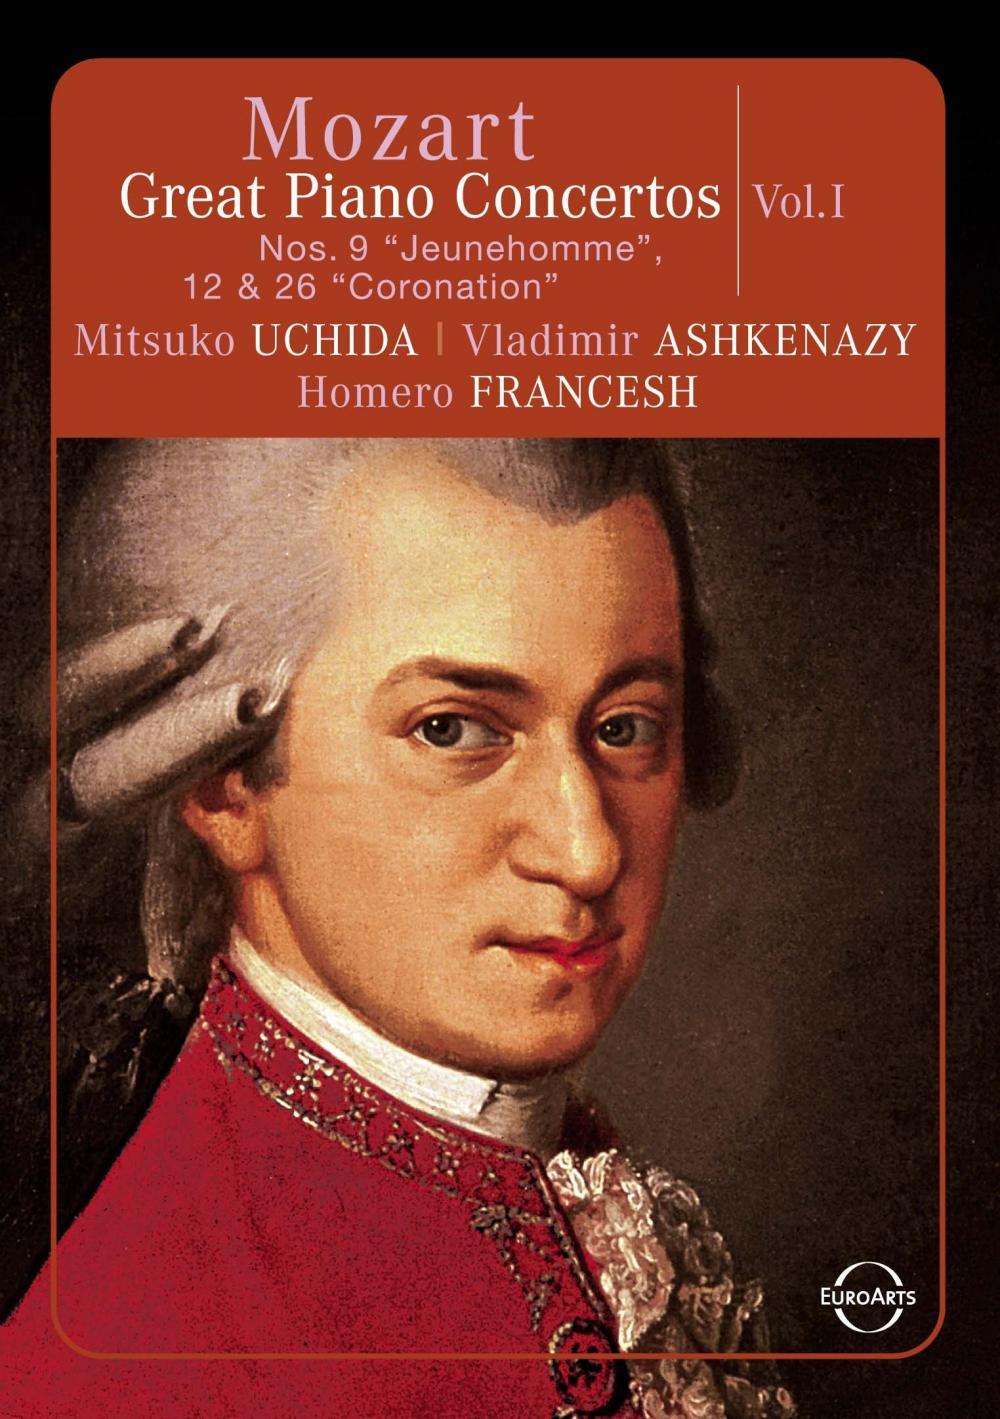 MOZART: THE GREAT PIANO CONCERTOS - 14 Concertos Performed by Uchida, Ashkenazy, Previn, Lupu, Kocsis and More (4 DVDs)